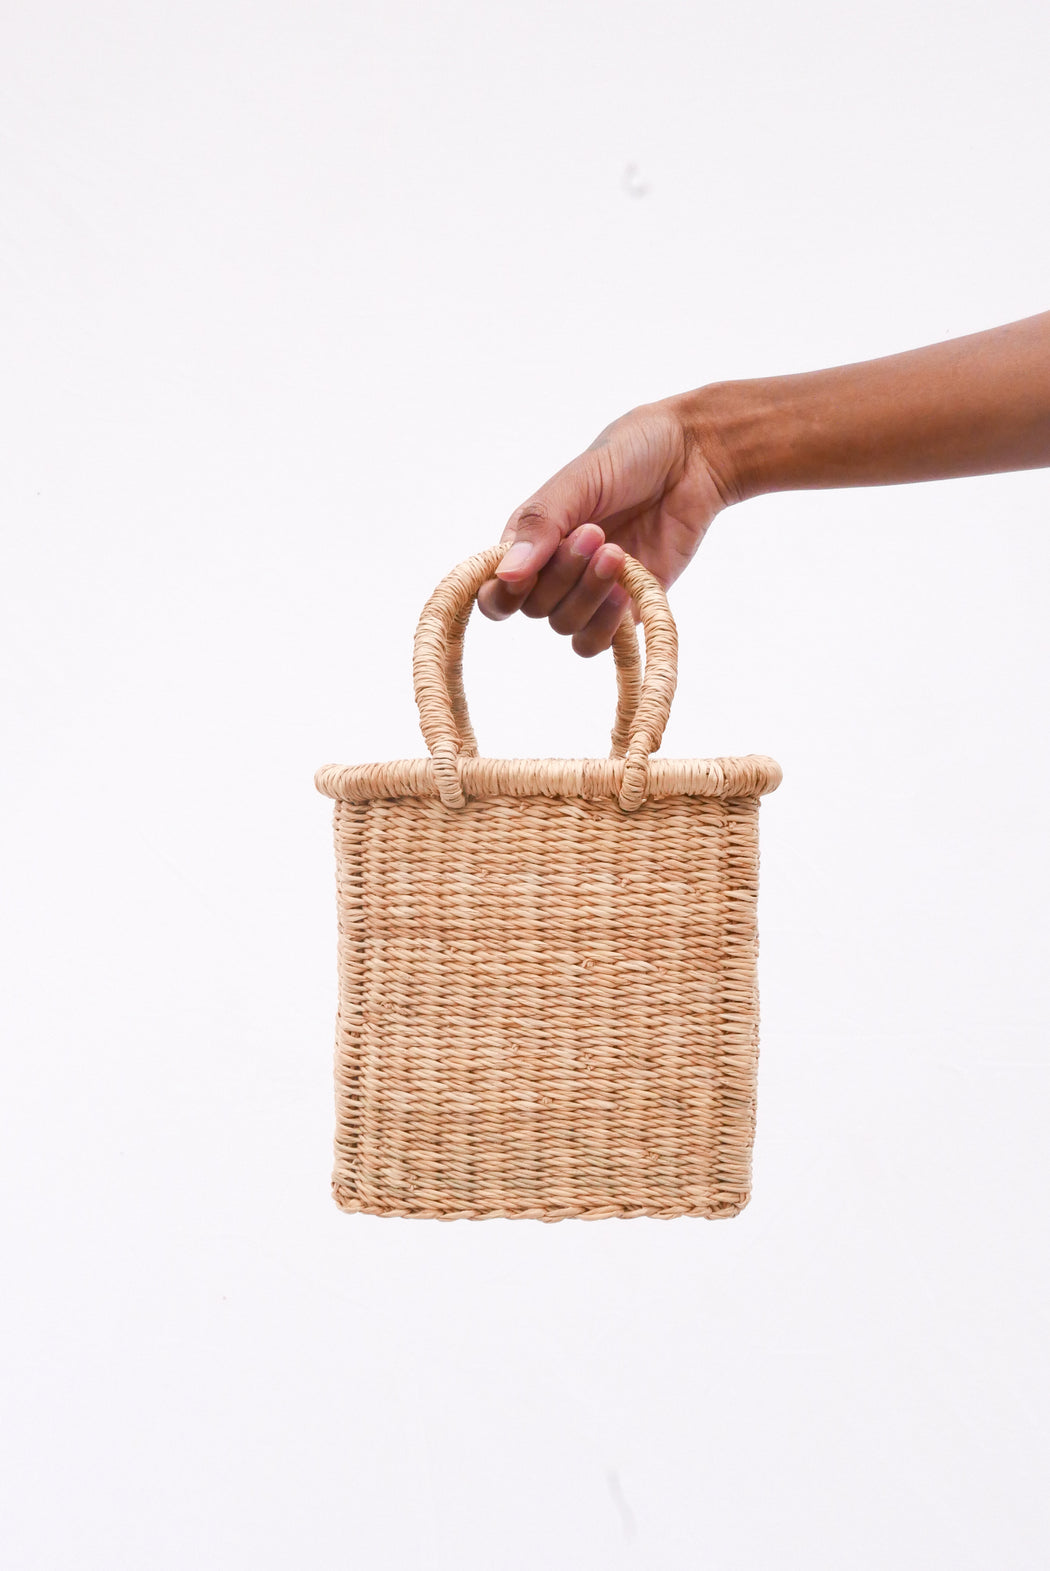 The Fuseini handbag is handwoven with straw called Kinkahe in Bolgatanga, Ghana. The shape is cube-like with two handles for durability. This product supports a community with employment, educational opportunities for the children and improve the work environment.